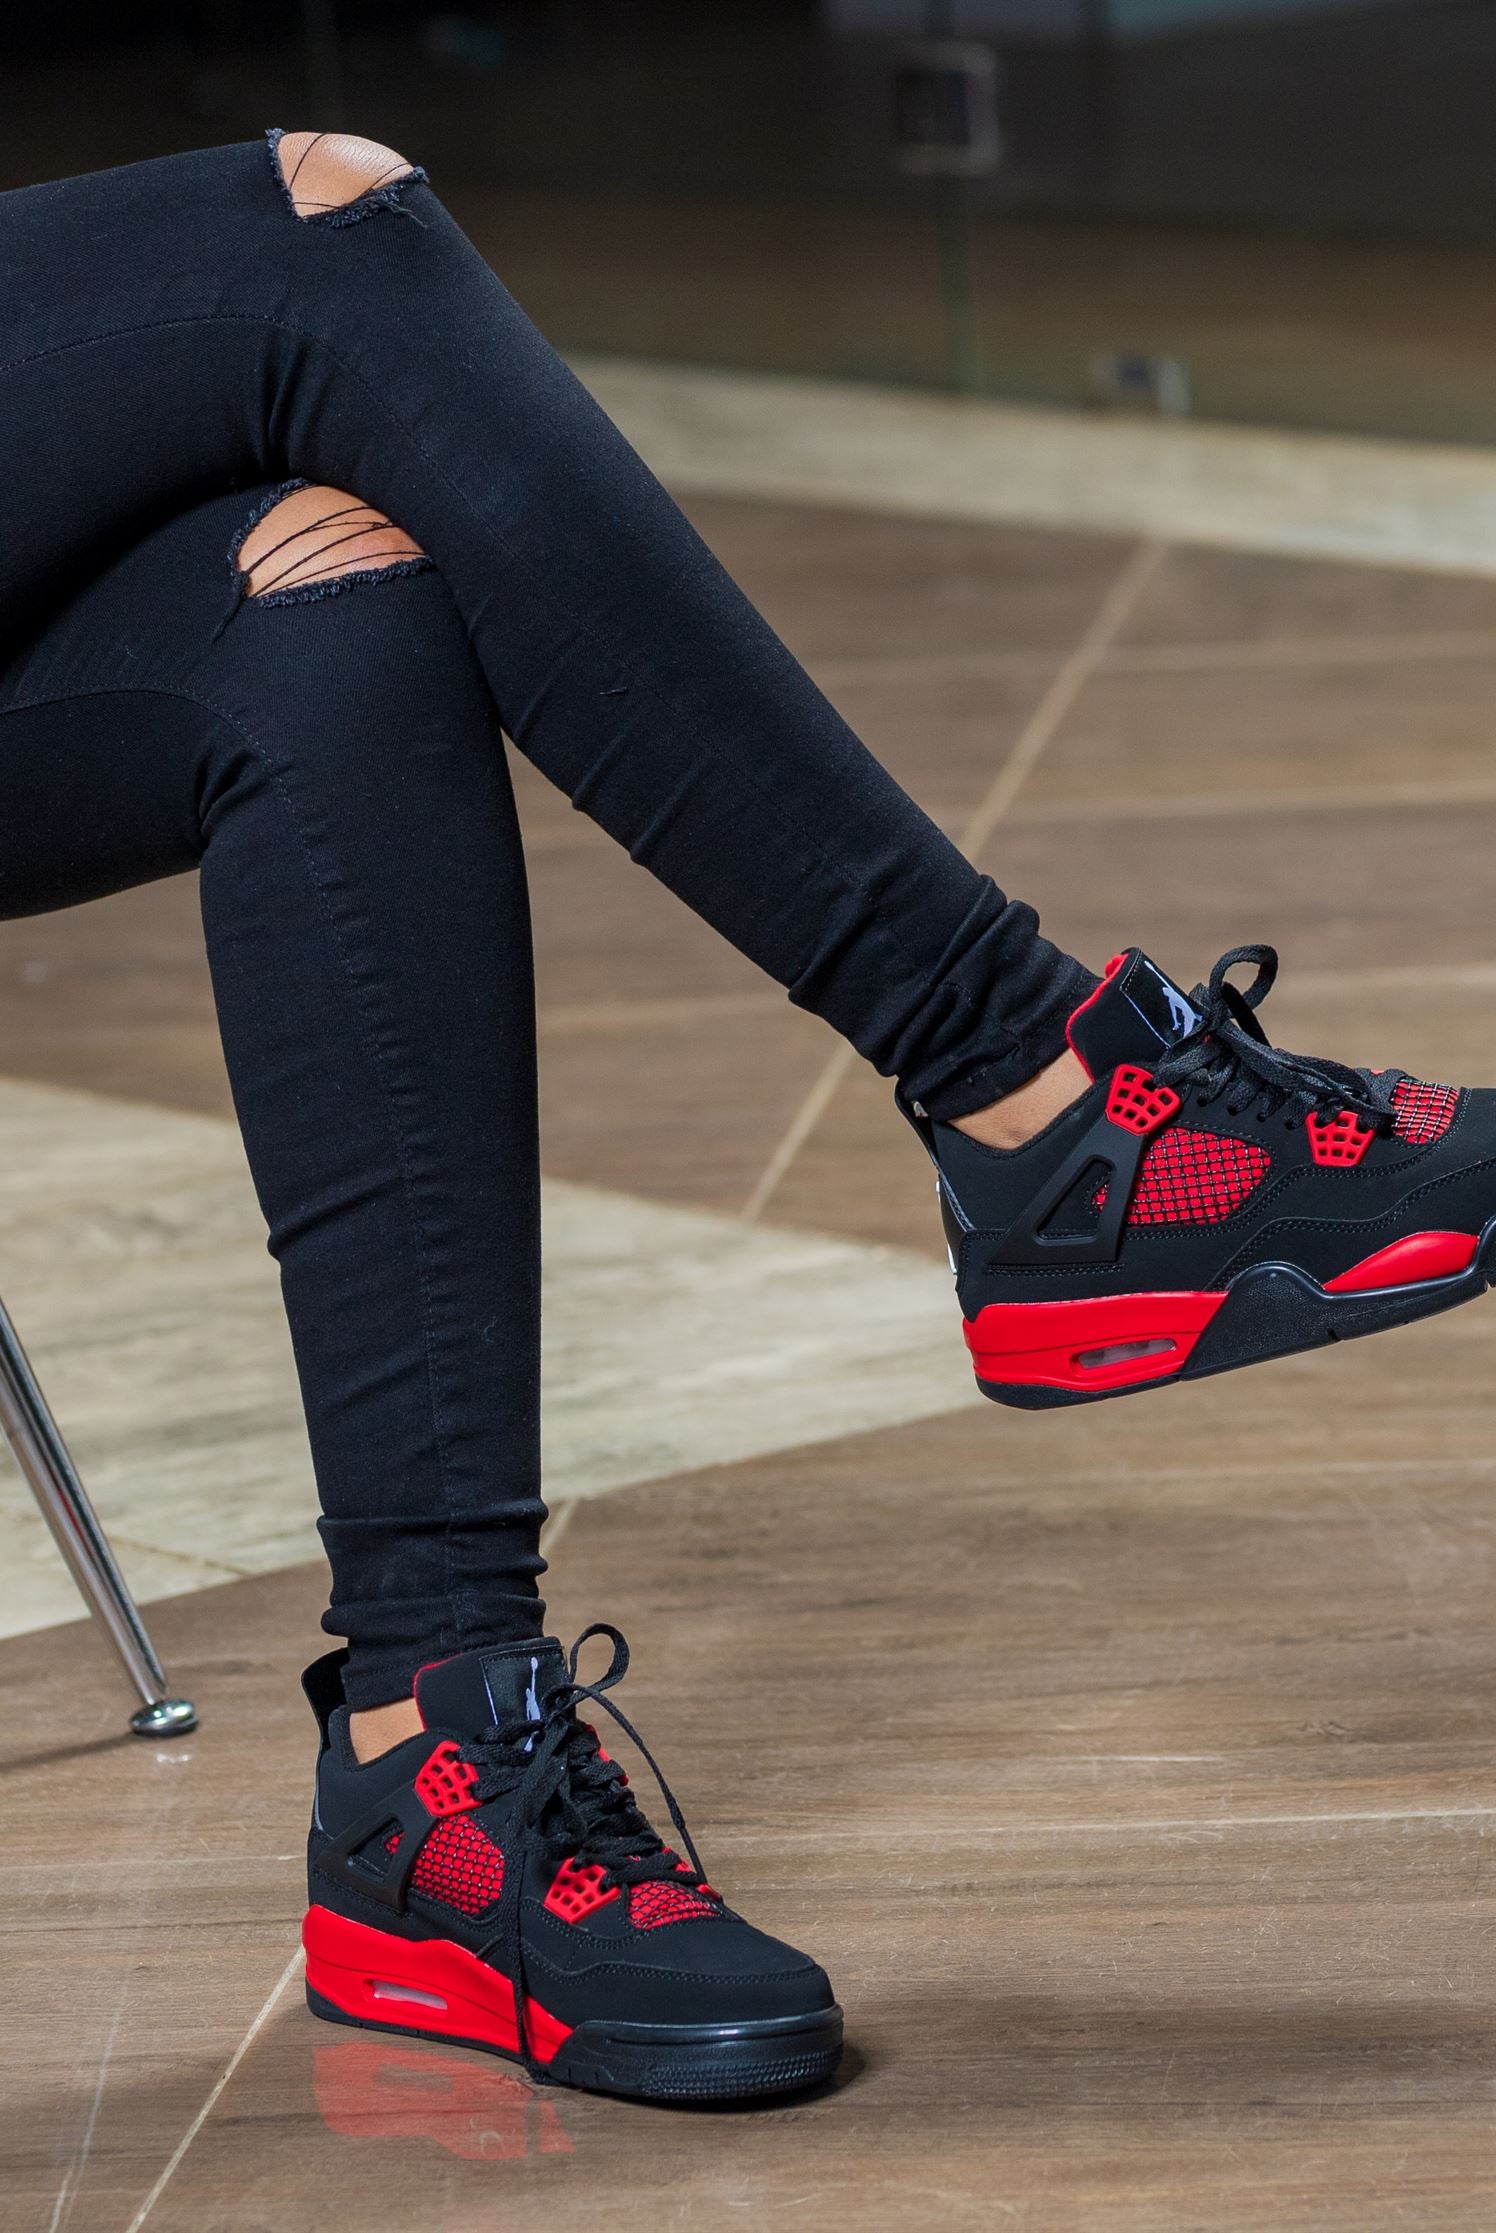 Hii-J4s Fights - Black and Red - Shop Kenya - Affordable Fashion Hii-J4s Fights - Black and Red hiiii_style accessories Sneakers jordan-4-black-and-res Black, Black sneakers, Buena Shoes, Discounted, j4, j4's, jordans, Low dunks, Nike, Offer, ON SALE, onsale, red, Red thunder, Sale, shoes, Sneakers Shop Kenya - Affordable Fashion